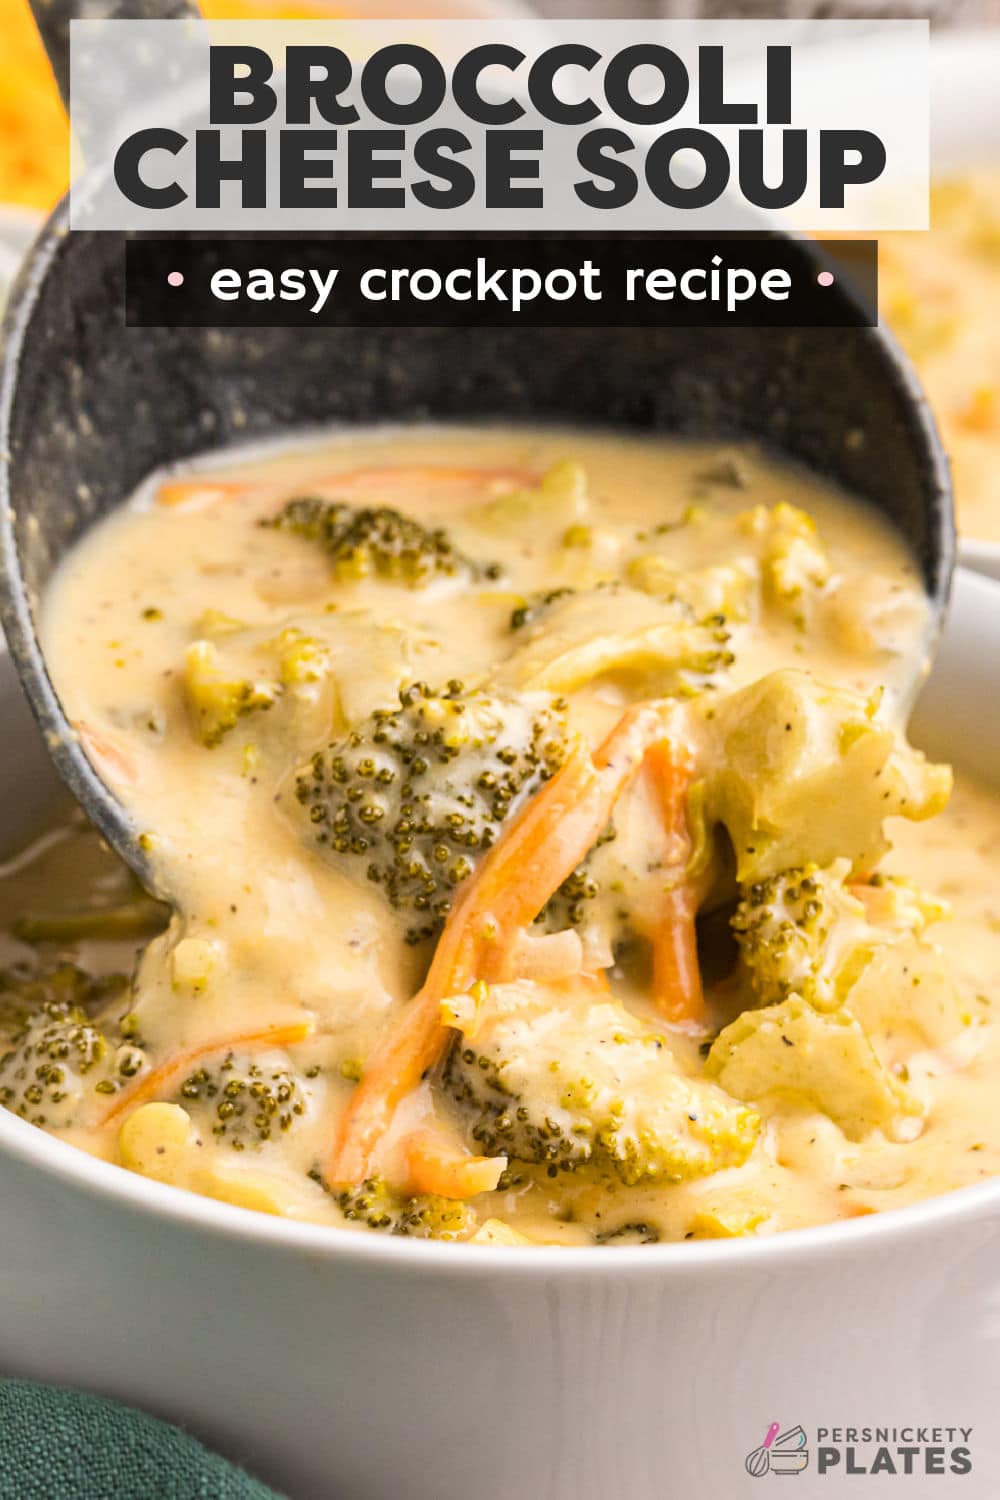 Slow cooker broccoli cheddar soup is a Panera bread copycat but I'm going to say it's even better! It’s rich and cheesy, loaded with tender broccoli, celery, and carrots in a flavorful broth. This creamy soup will be the best part of your day!  | www.persnicketyplates.com